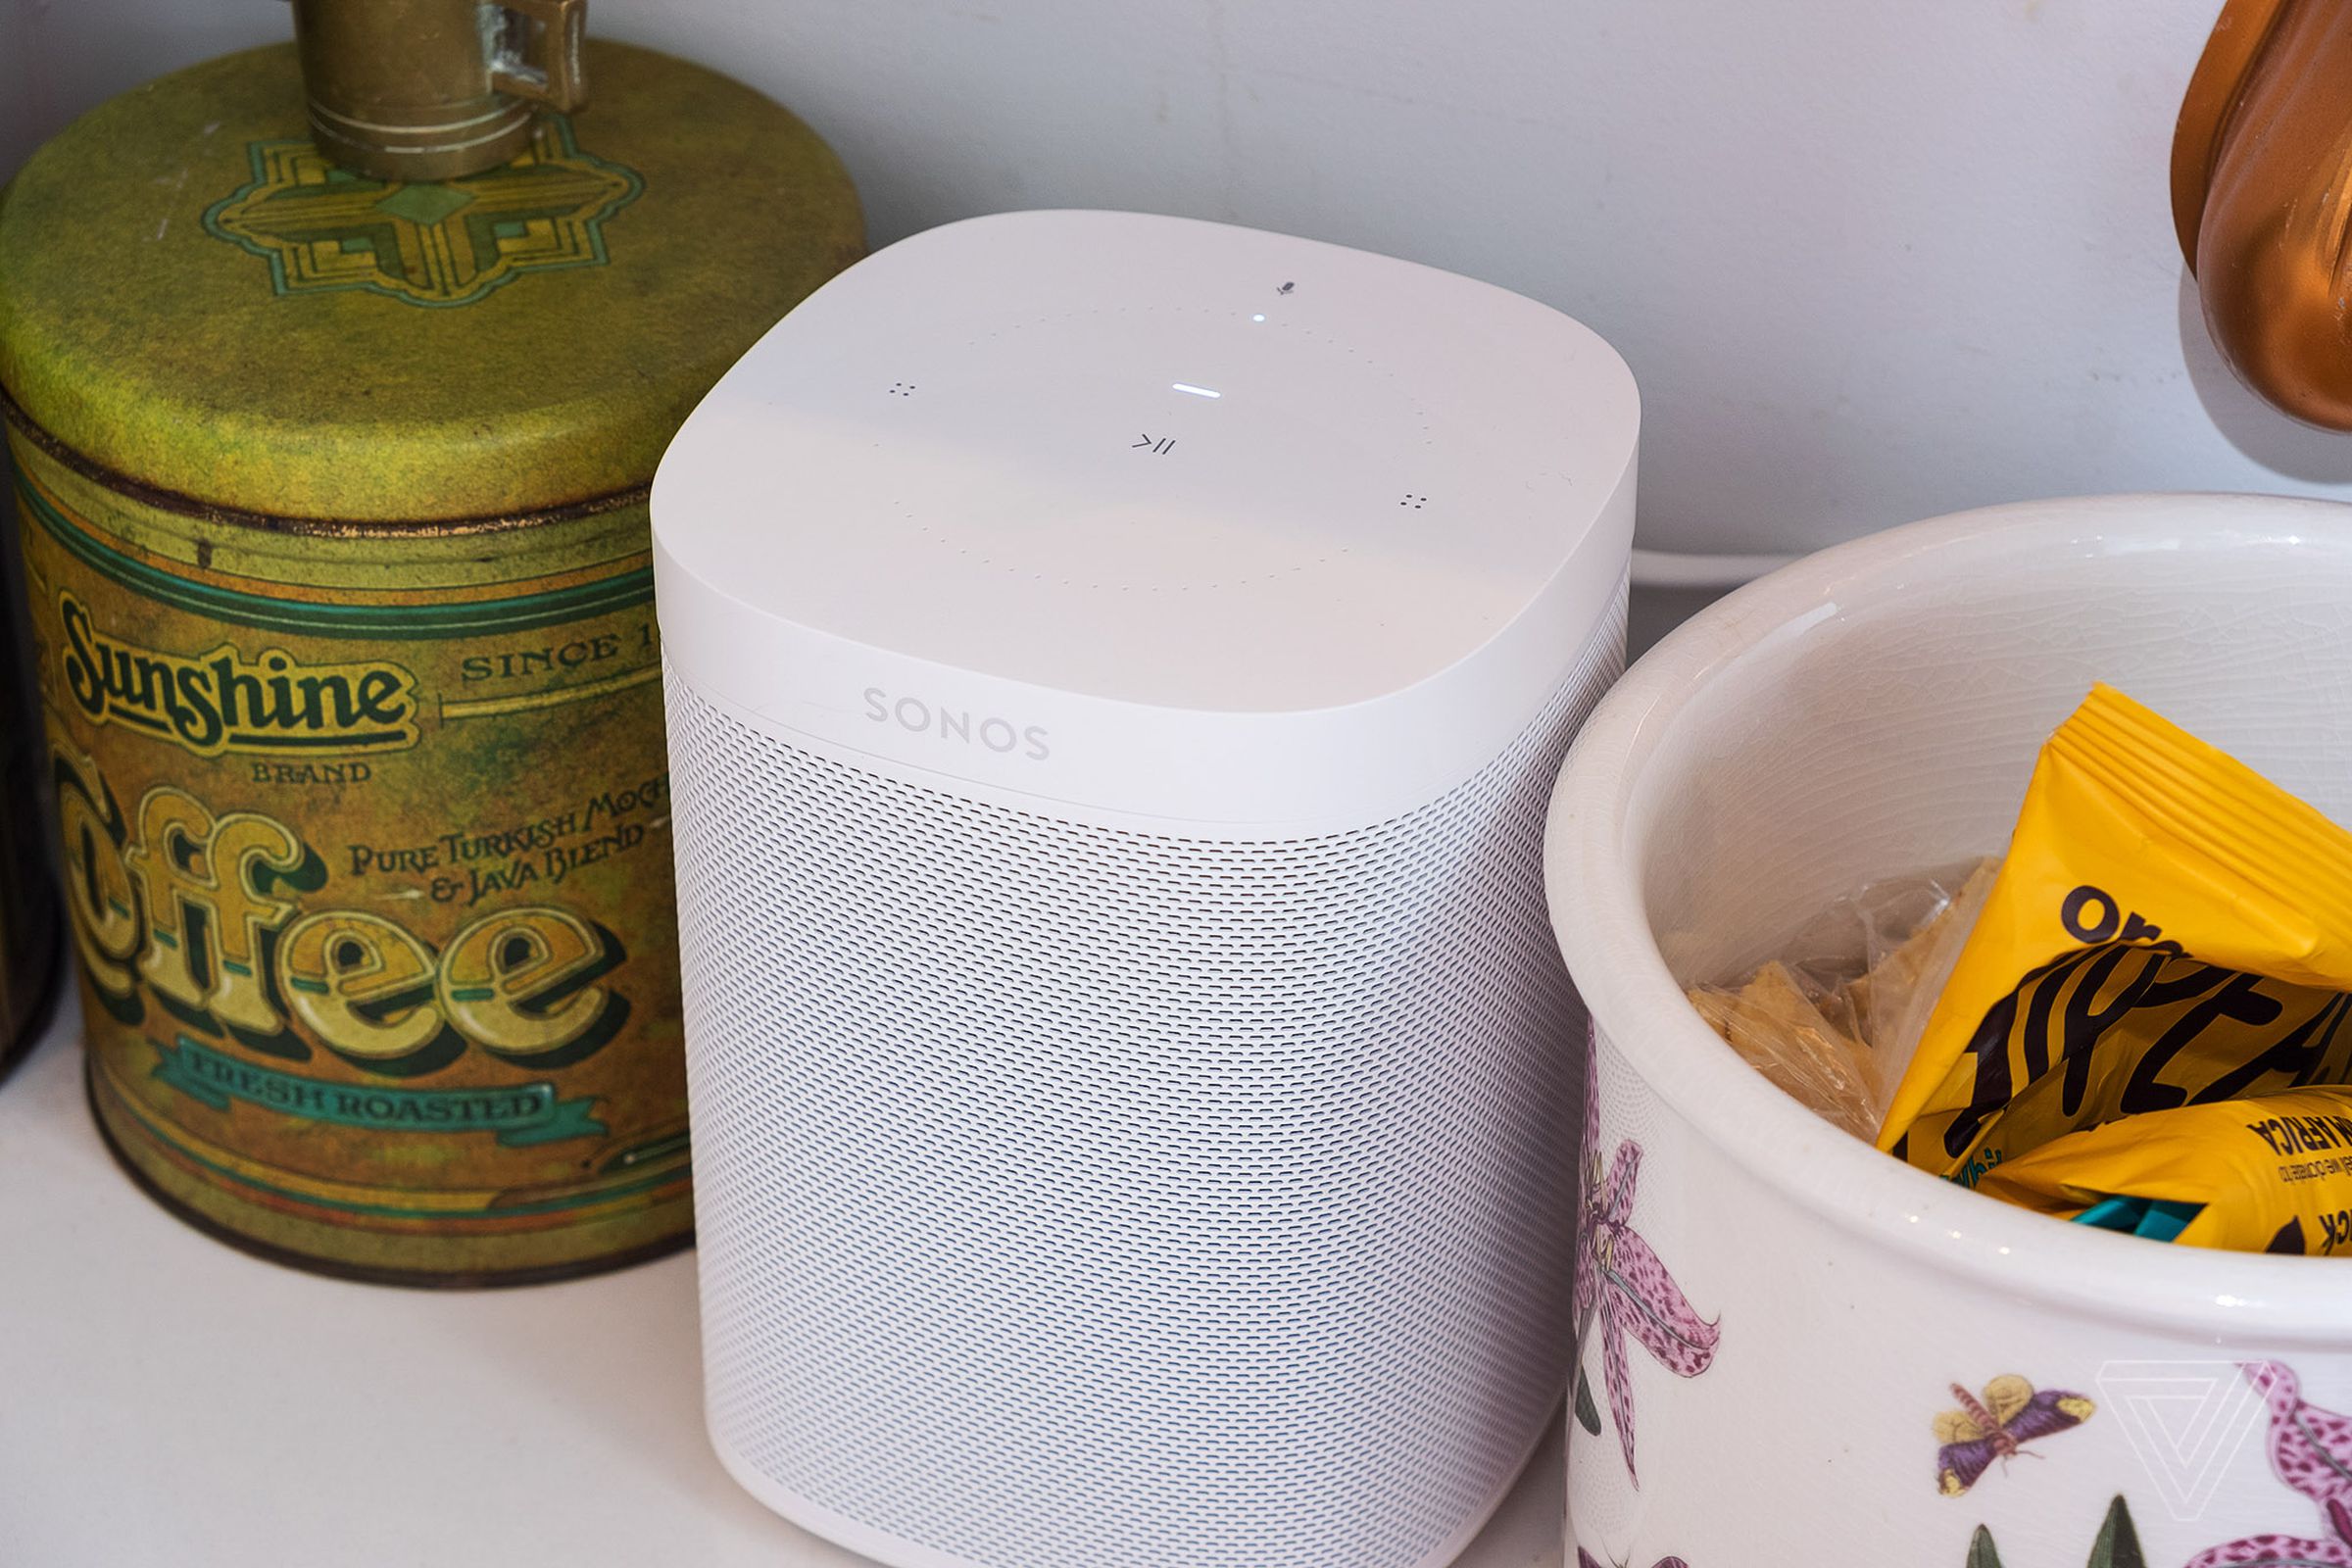 A photo of the Sonos One speaker on a kitchen counter.